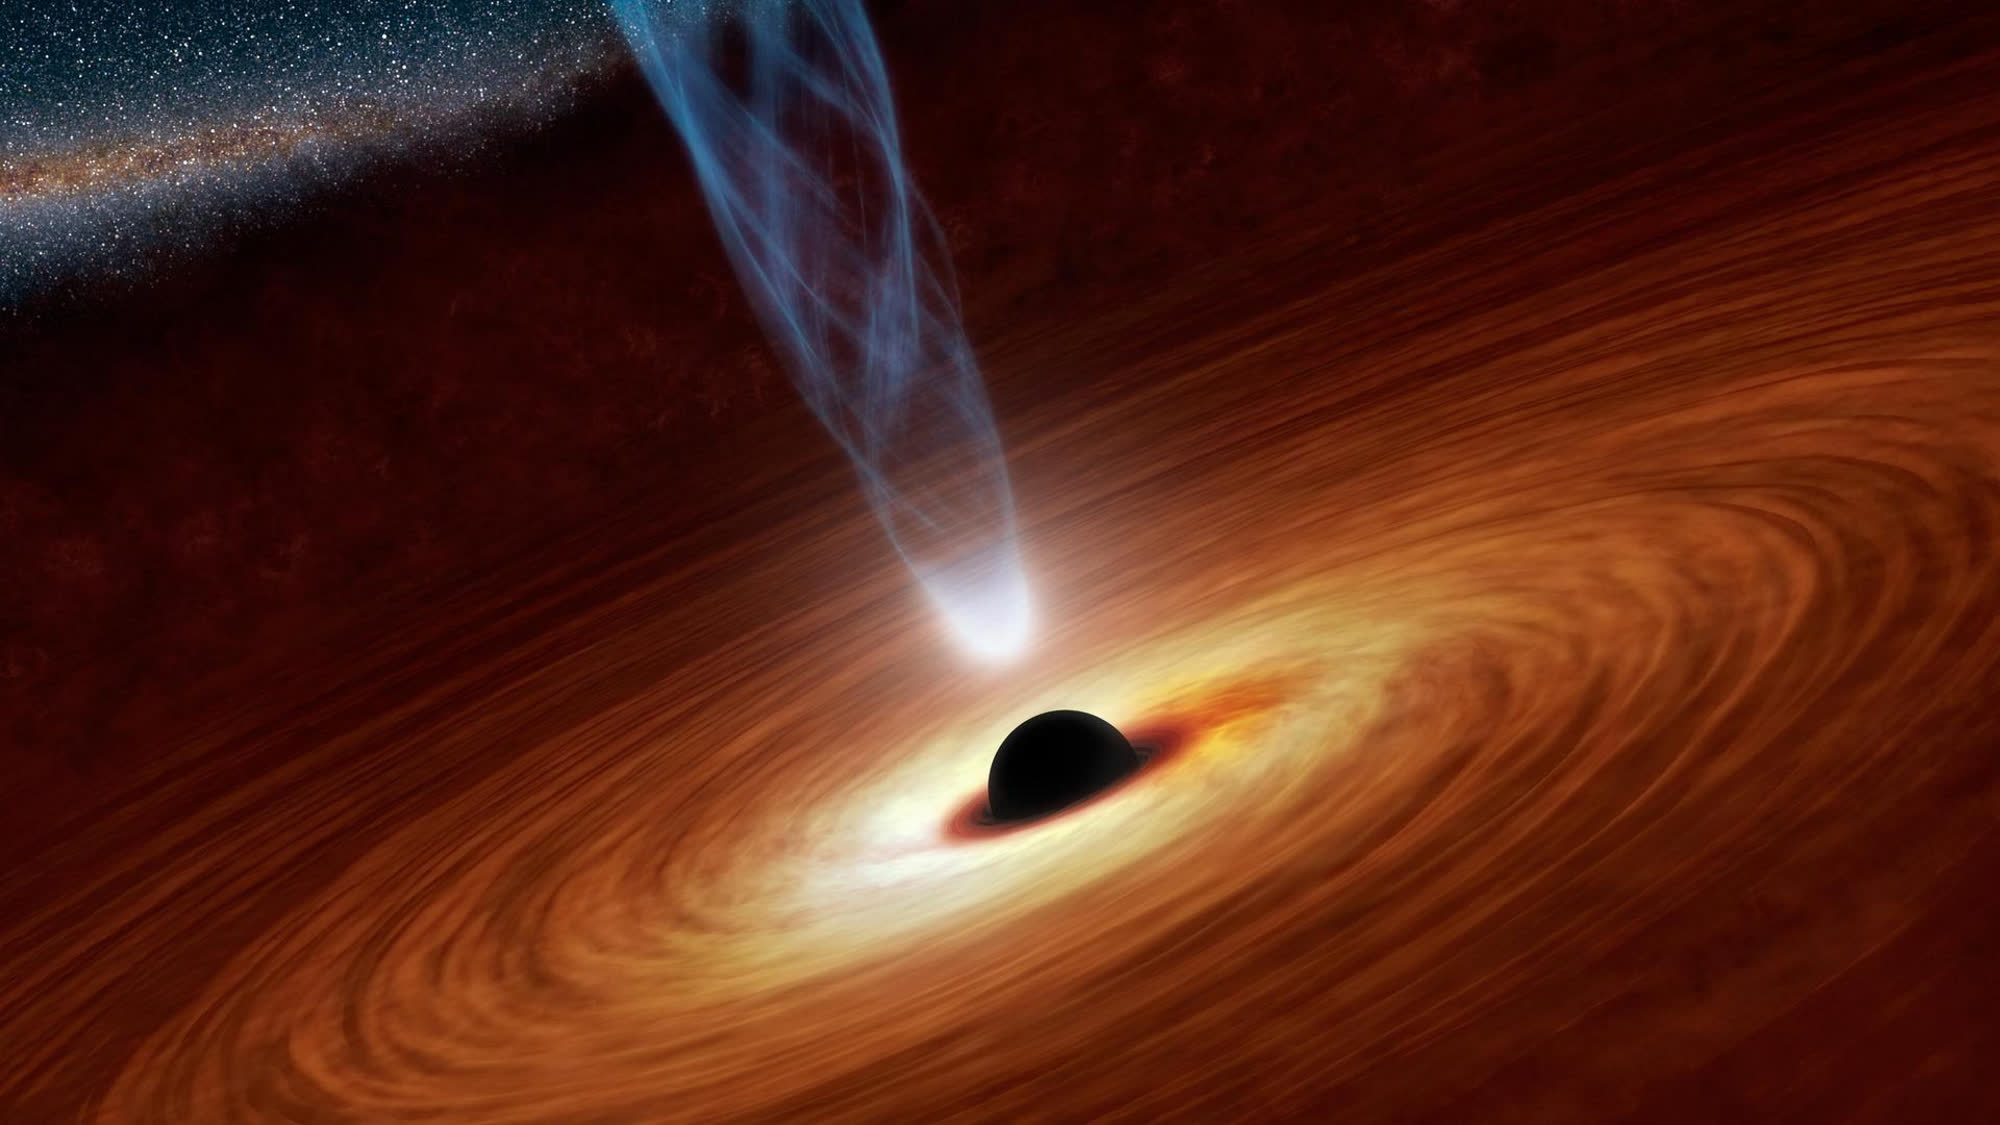 Researchers discover a potential supermassive black hole wandering through space